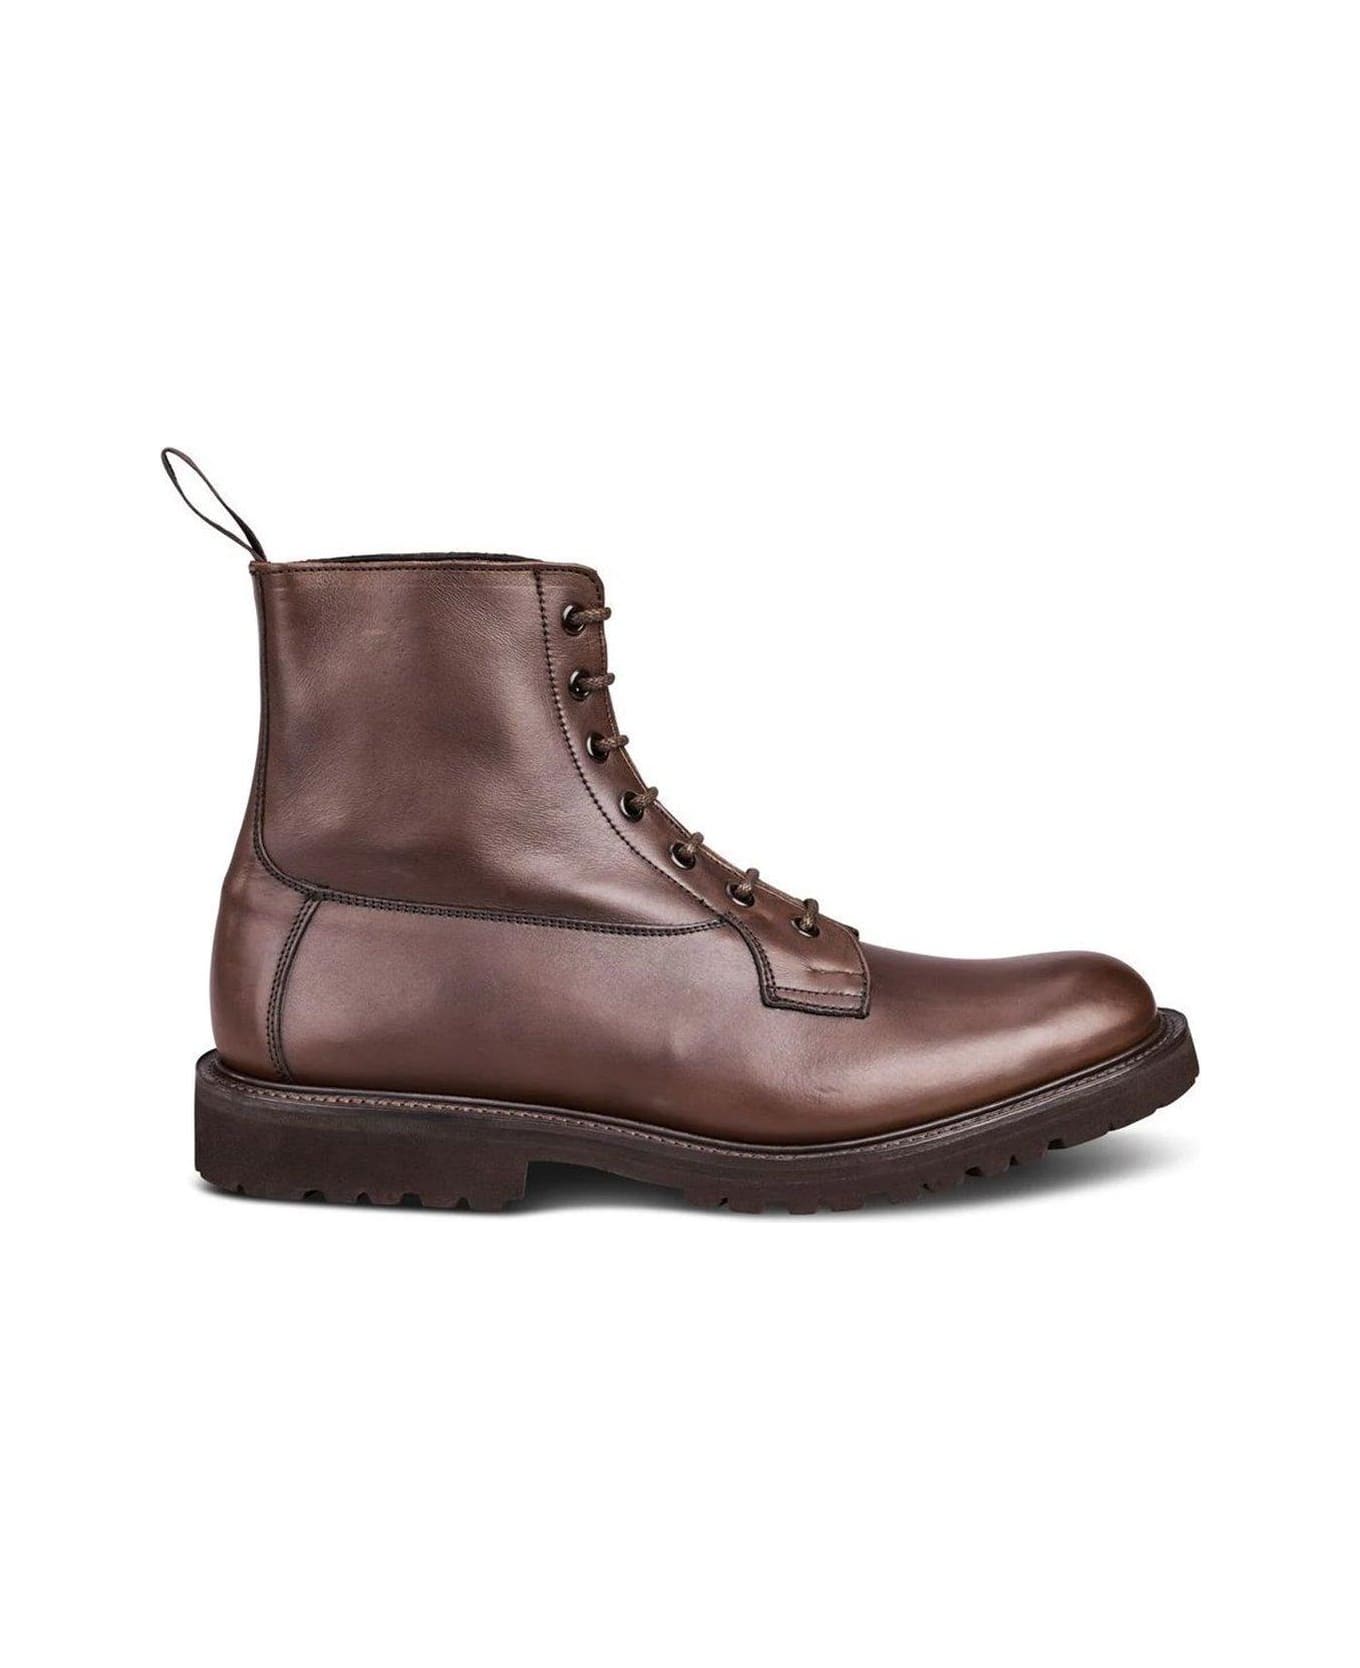 Tricker's Lace-up Boots Boots - ESPRESSO